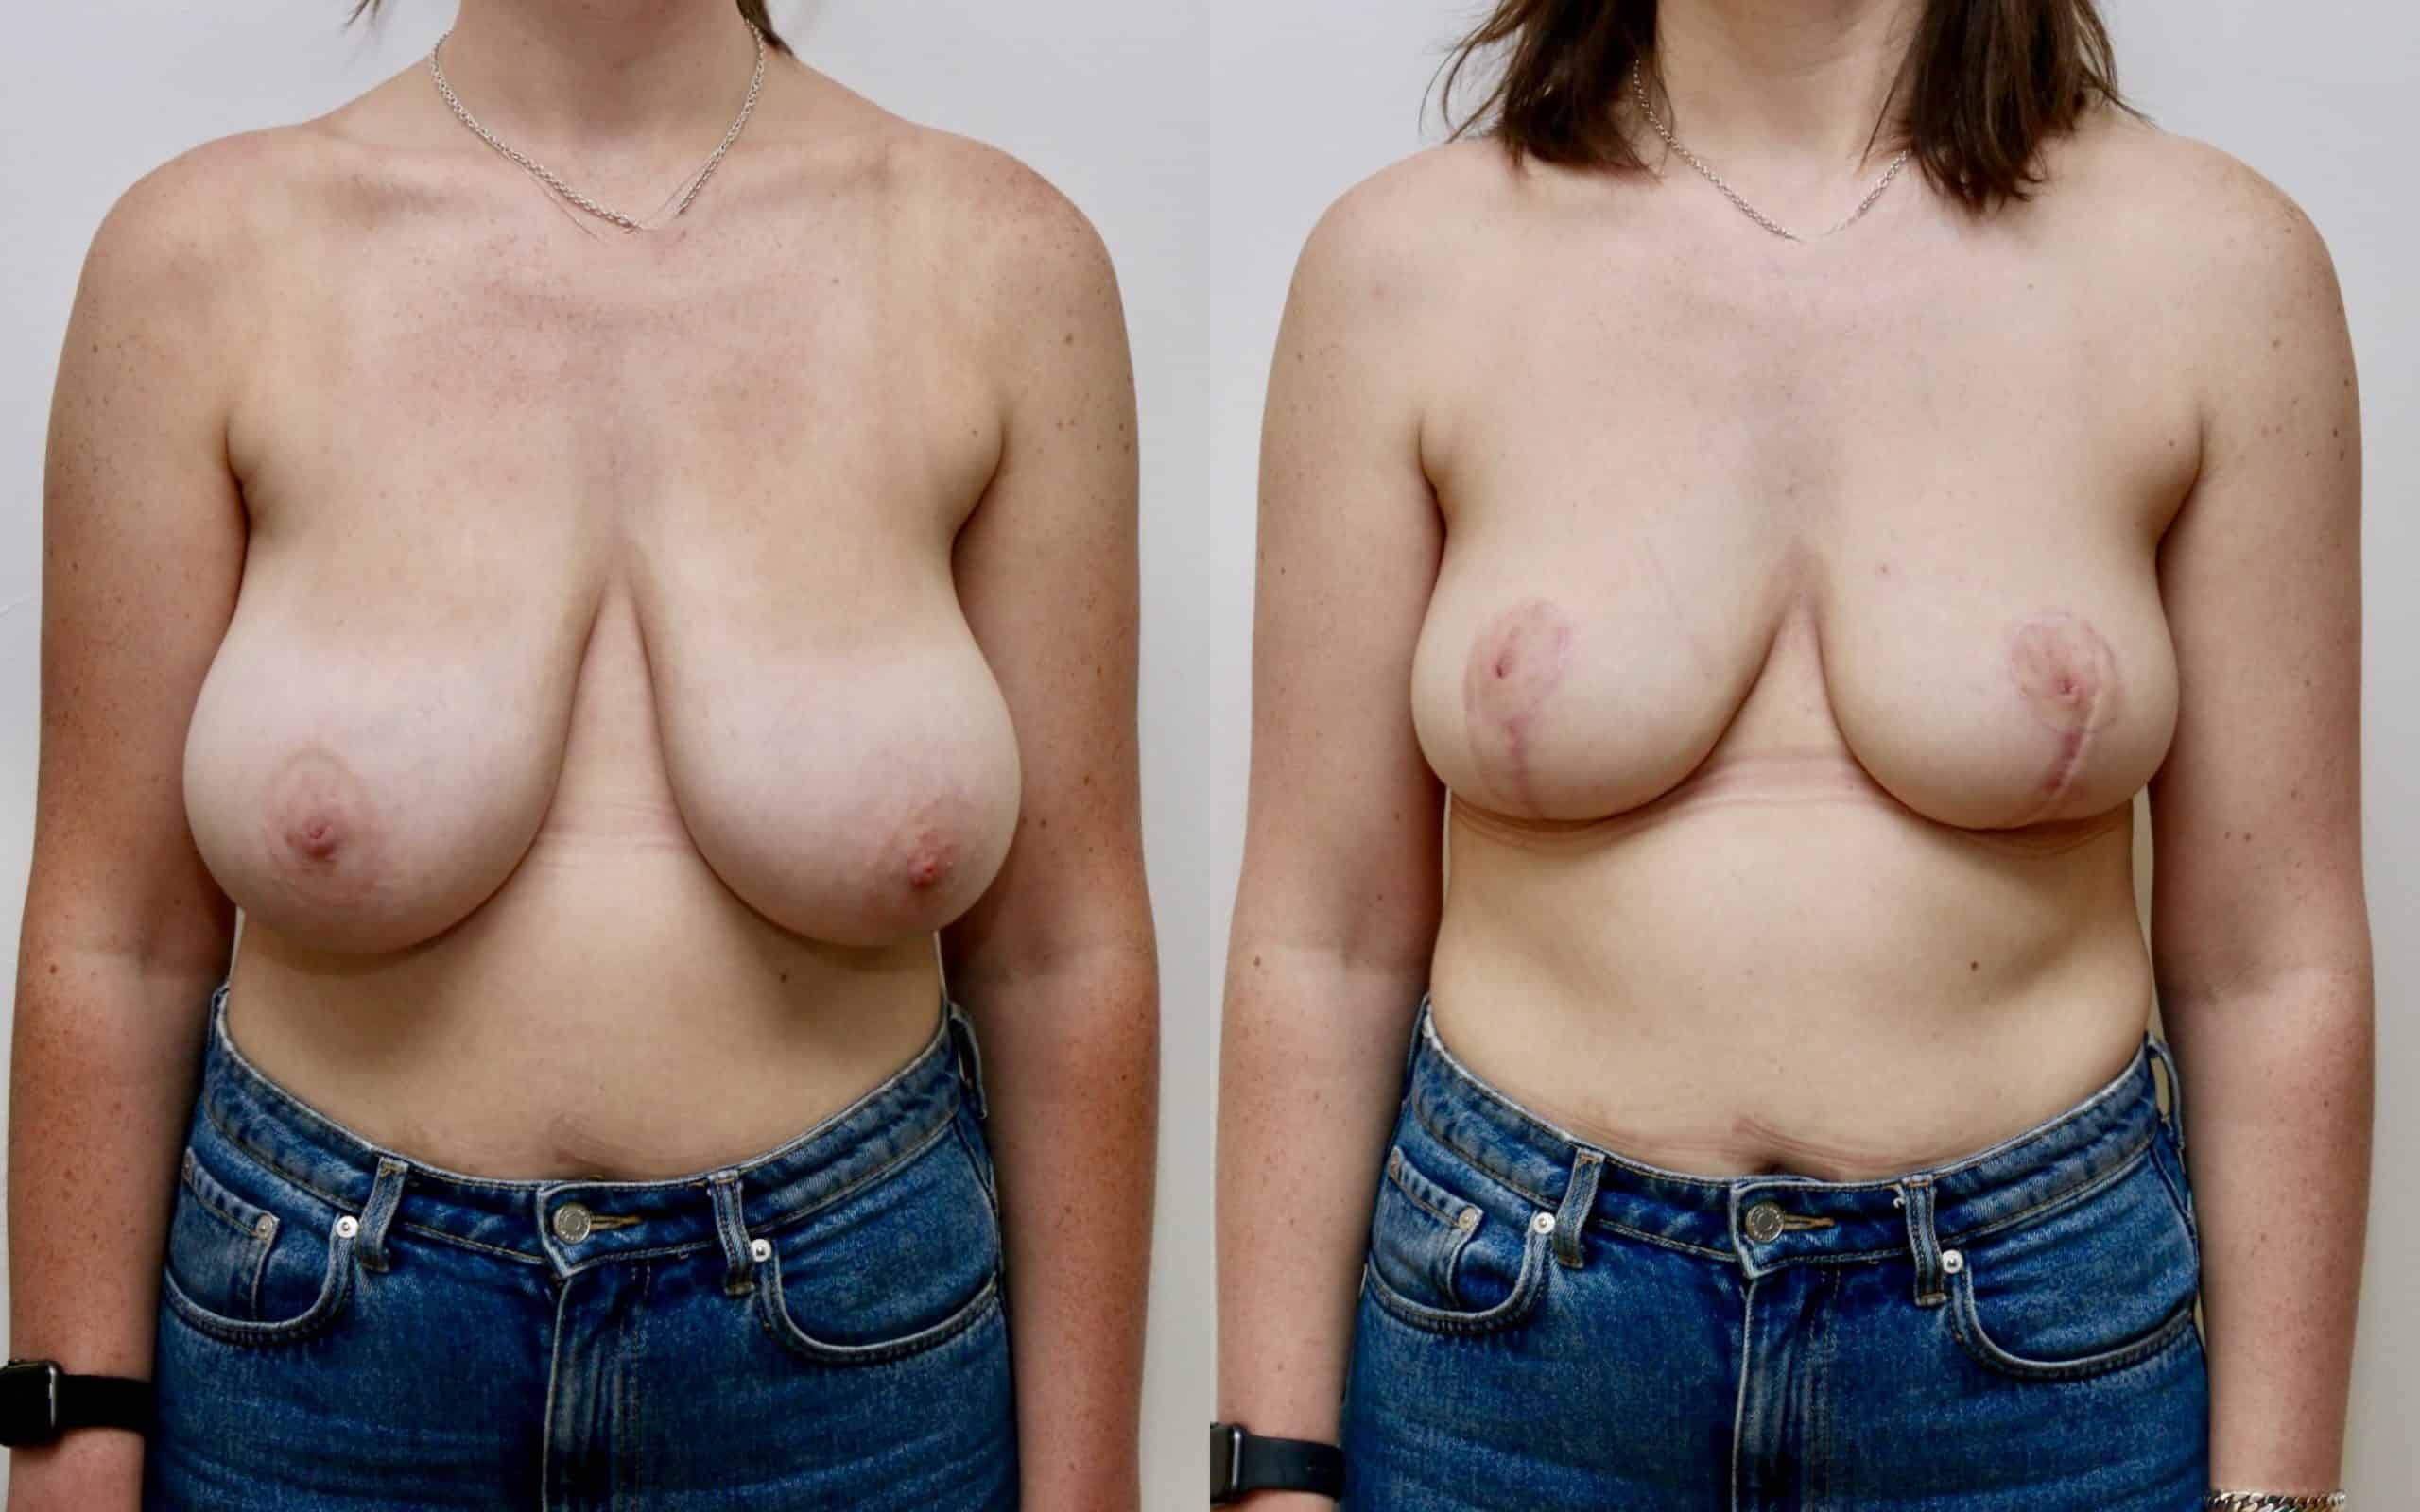 Breast reduction/ lift 6 months post-op